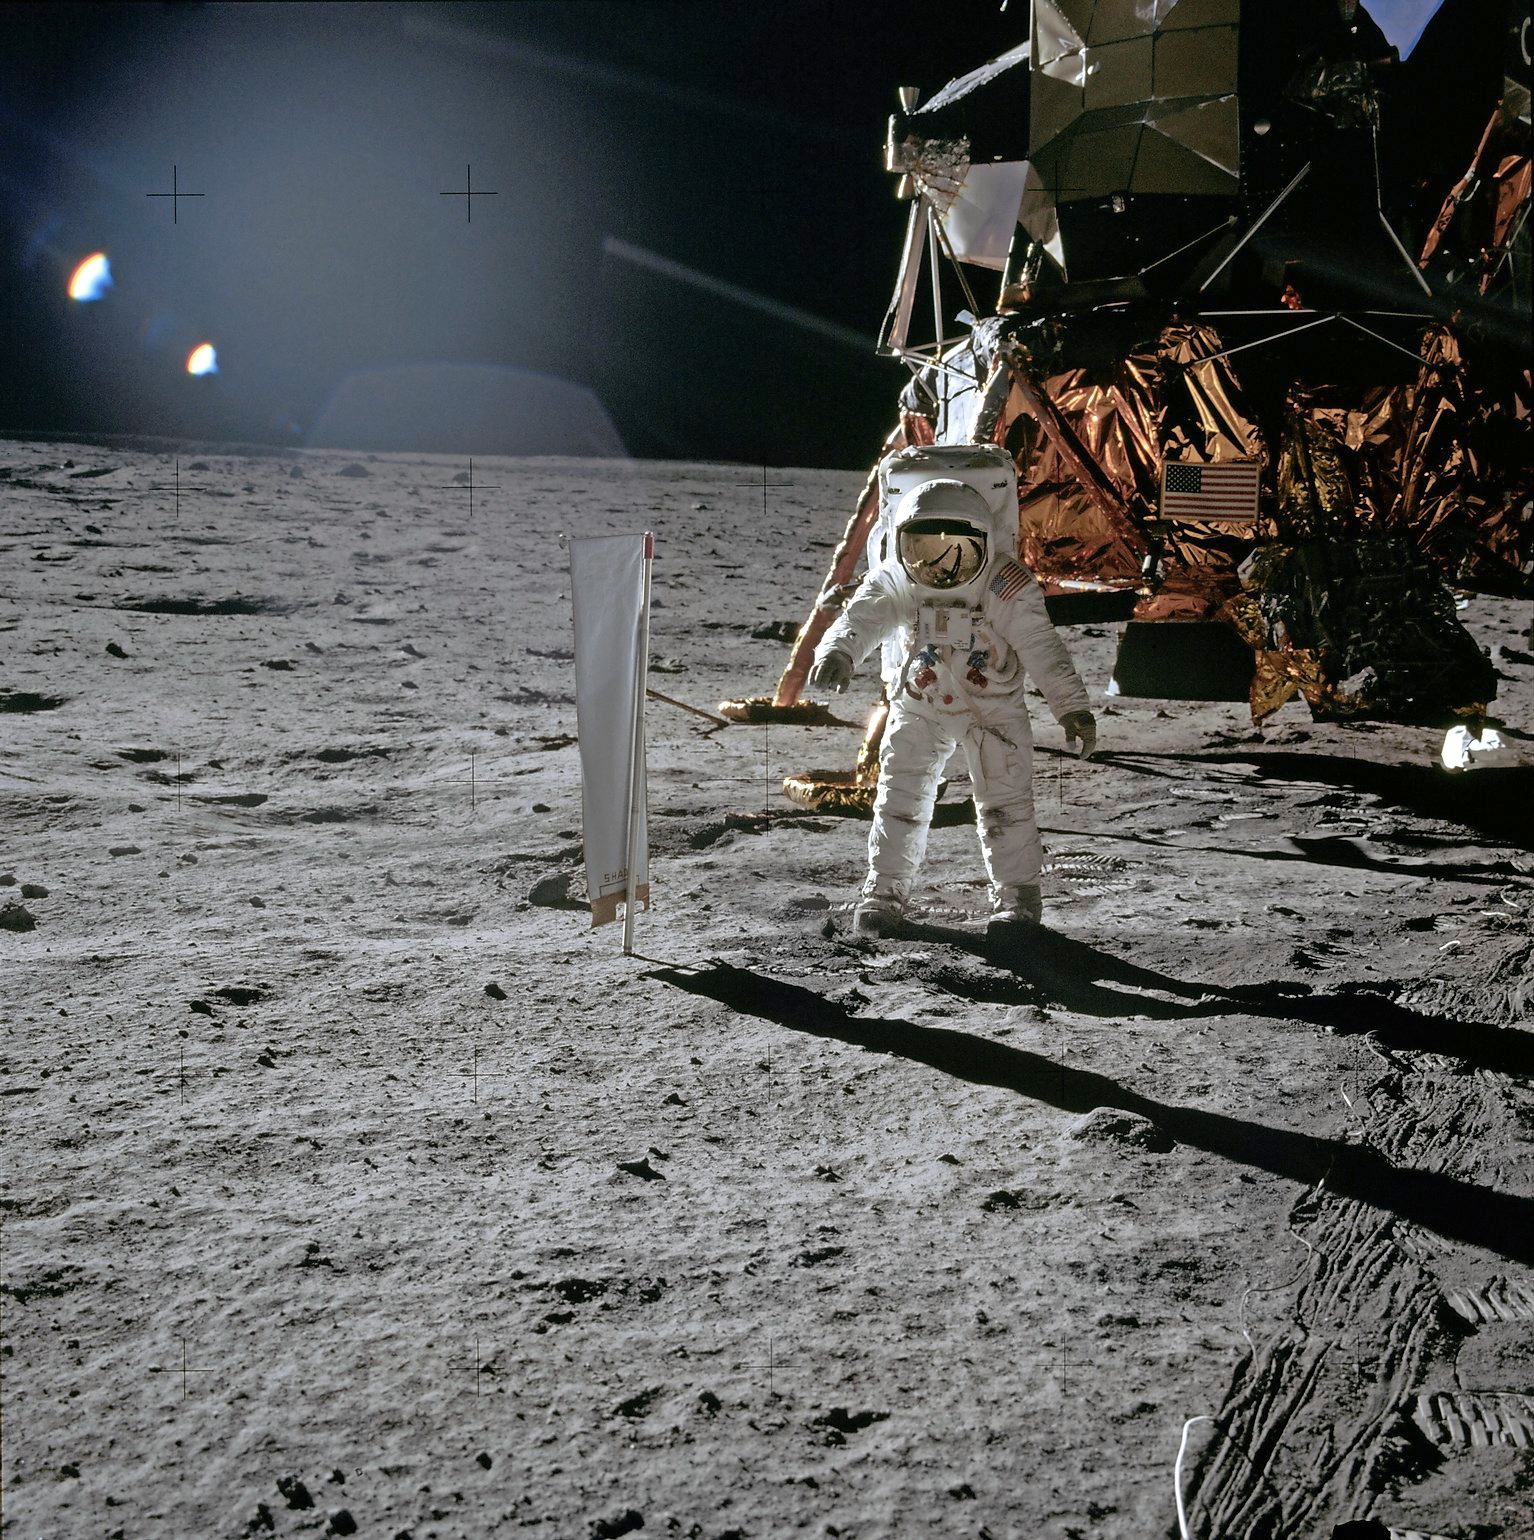 Astronaut Edwin E. Aldrin, Lunar Module (LM) pilot, stands beside the Solar-Wind Composition (SWC) Experiment,facing the camera. The LM is visible behind Adrin.  Linear trails (lines) in the right foreground were formed by the cable of the surface television camera.  The cable is visible on the lunar surface.  Image taken at Tranquility Base during the Apollo 11 Mission. Original film magazine was labeled S.  Film Type: Ektachrome EF SO168 color film on a 2.7-mil Estar polyester base taken with a 60mm lens. Sun angle is Medium. Tilt direction is Southeast (SE).
 Apollo 11 Mission image - Astronaut Edwin Aldrin stands beside t